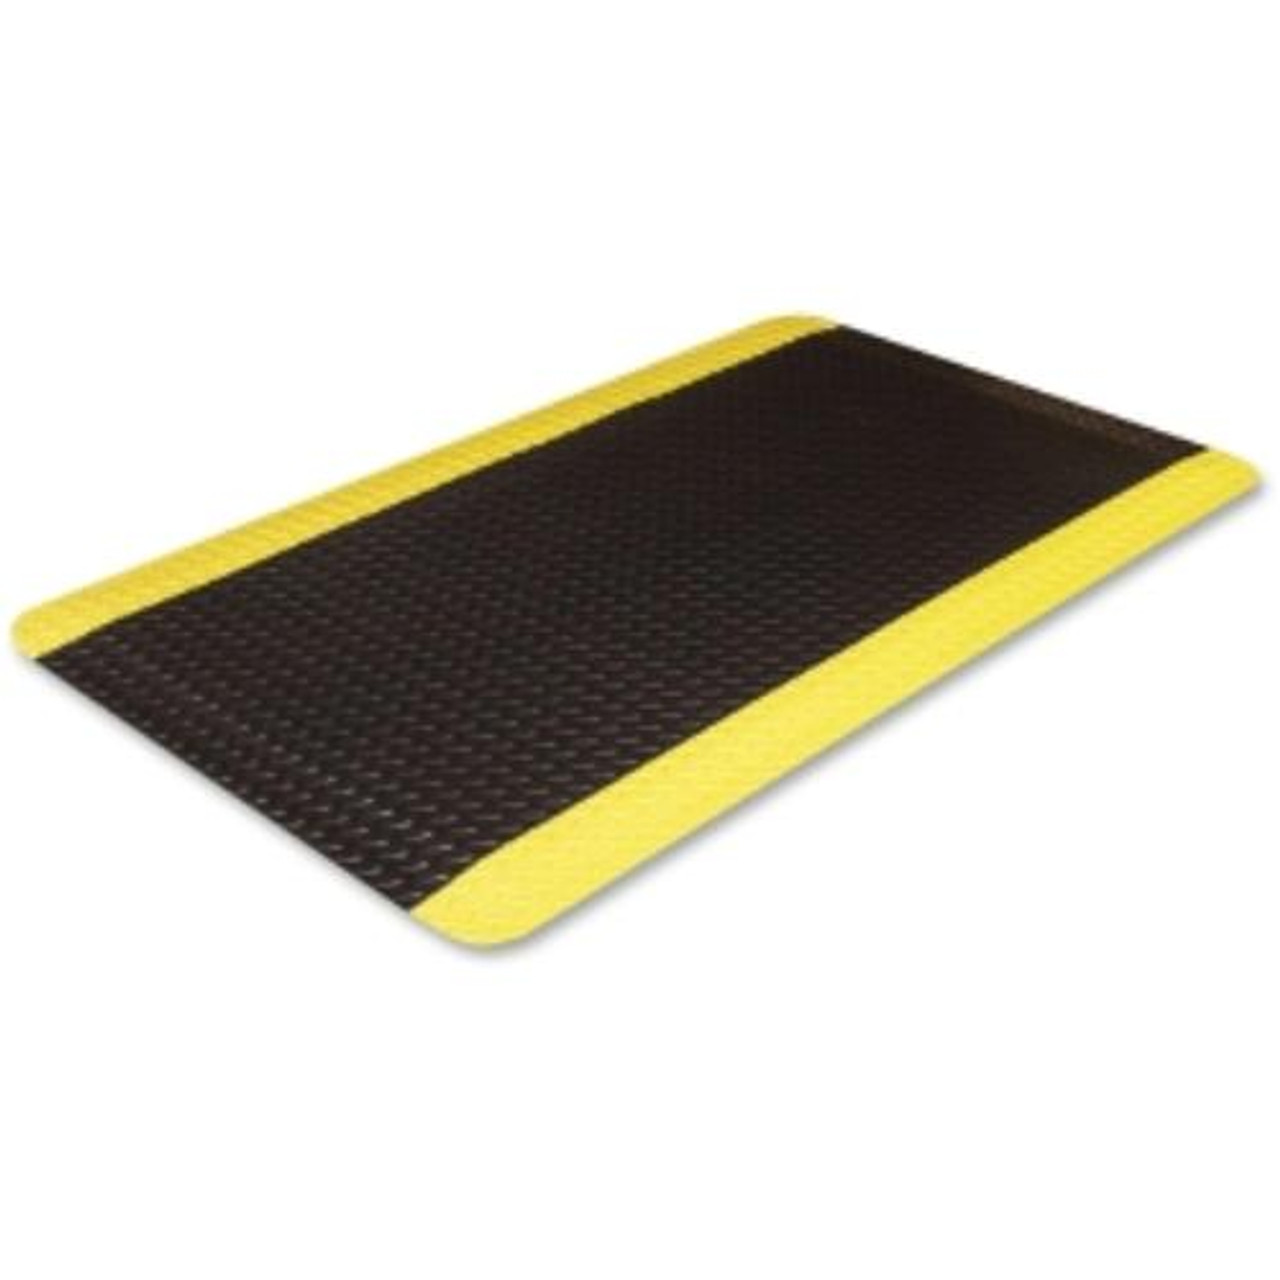 This Cushioned Anti-Fatigue Mat Is On Sale For 56 Percent Off On